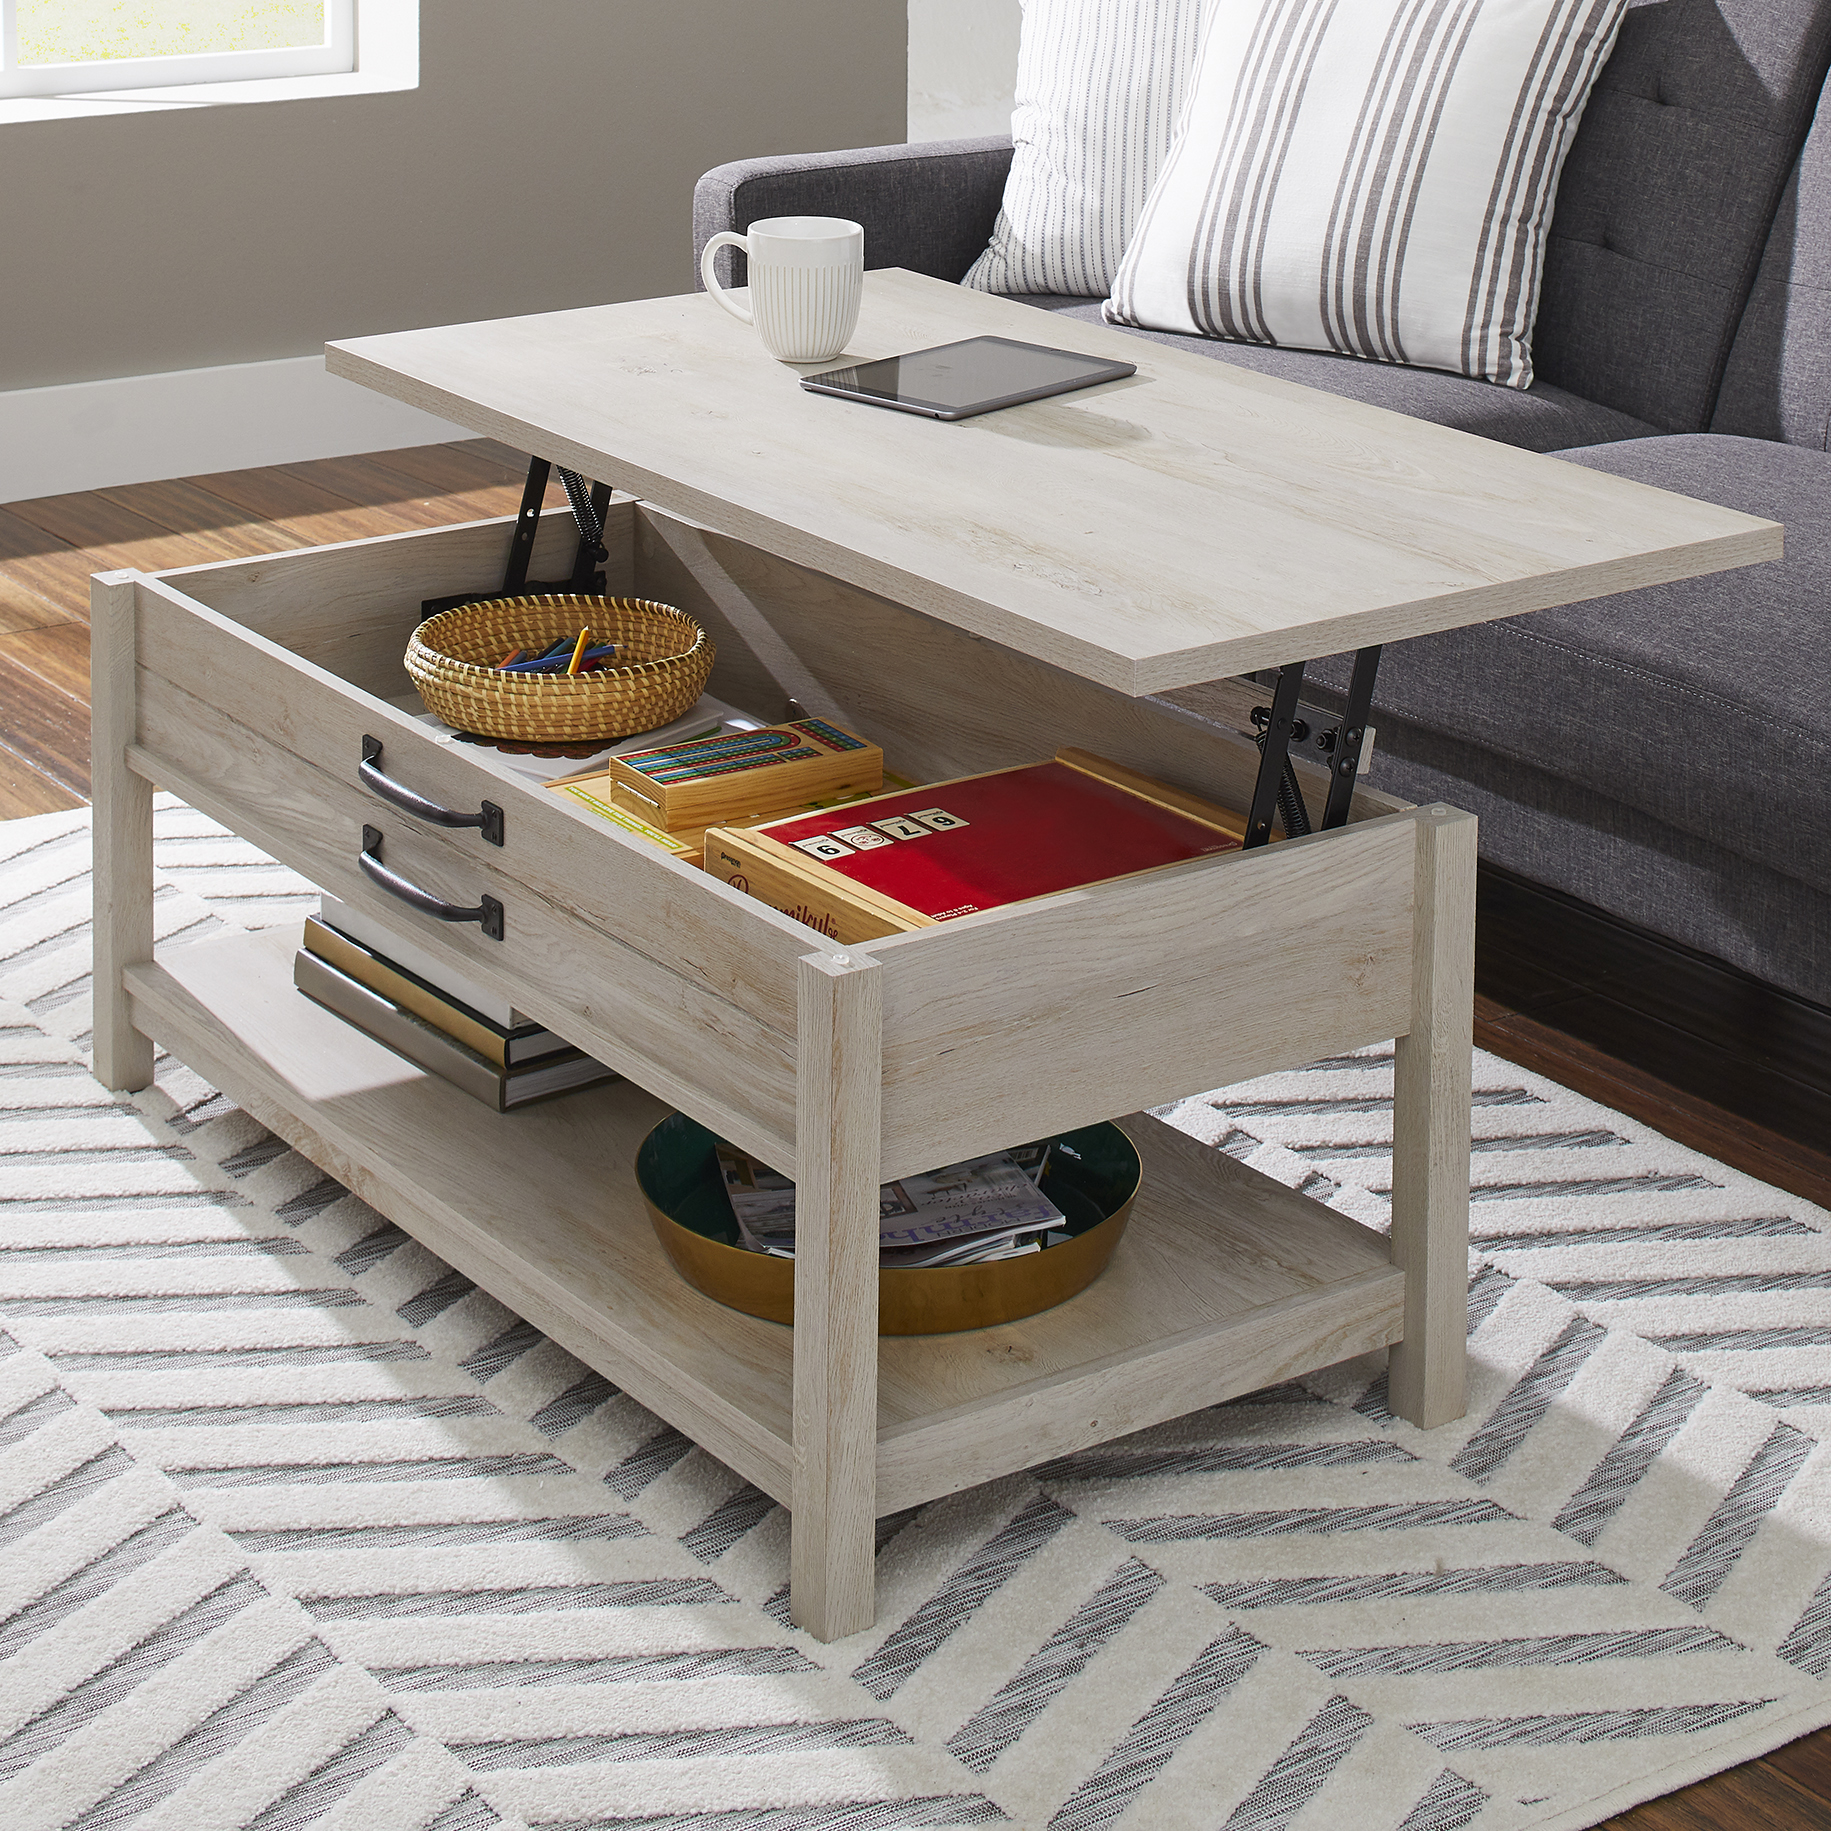 Better Homes & Gardens Modern Farmhouse Rectangle Lift Top Coffee Table, Rustic White Finish - image 4 of 16